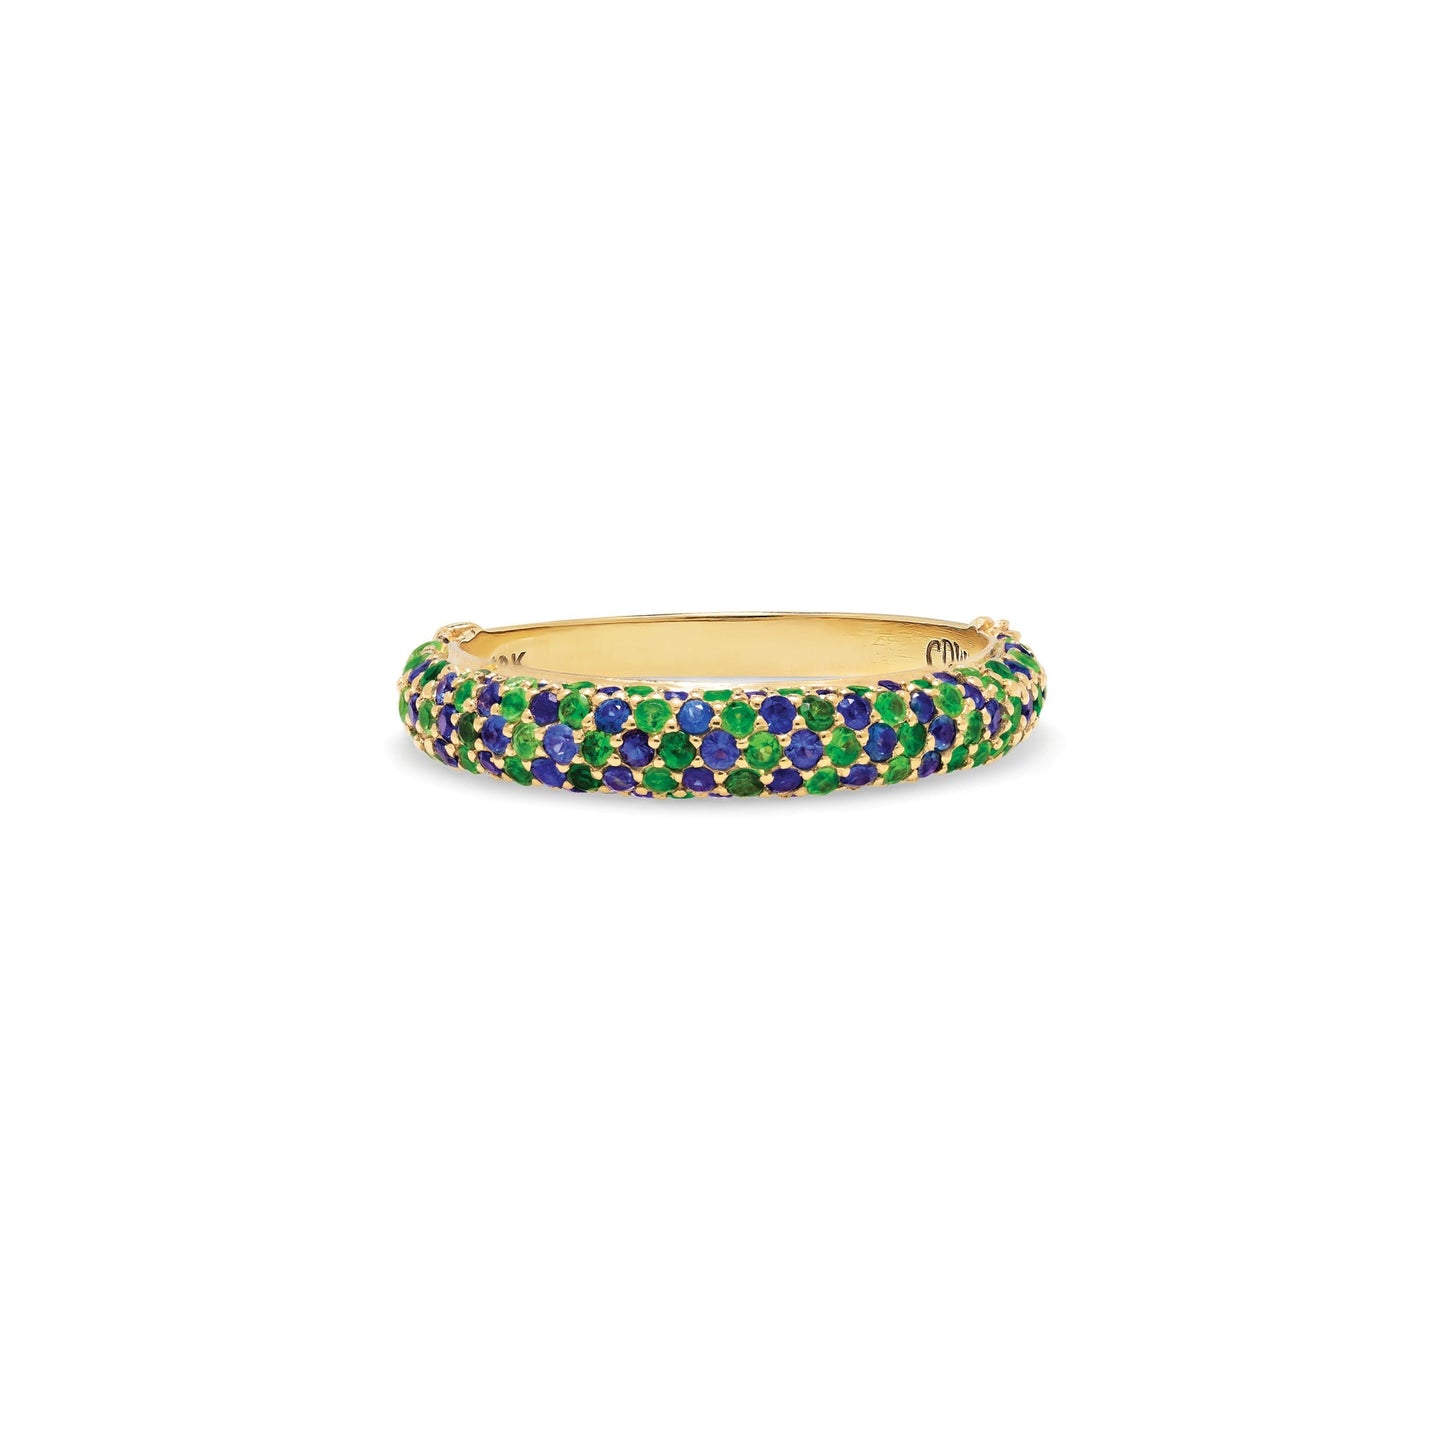 Ring tsavorite & sapphire pave band size 7 - Gaines Jewelers